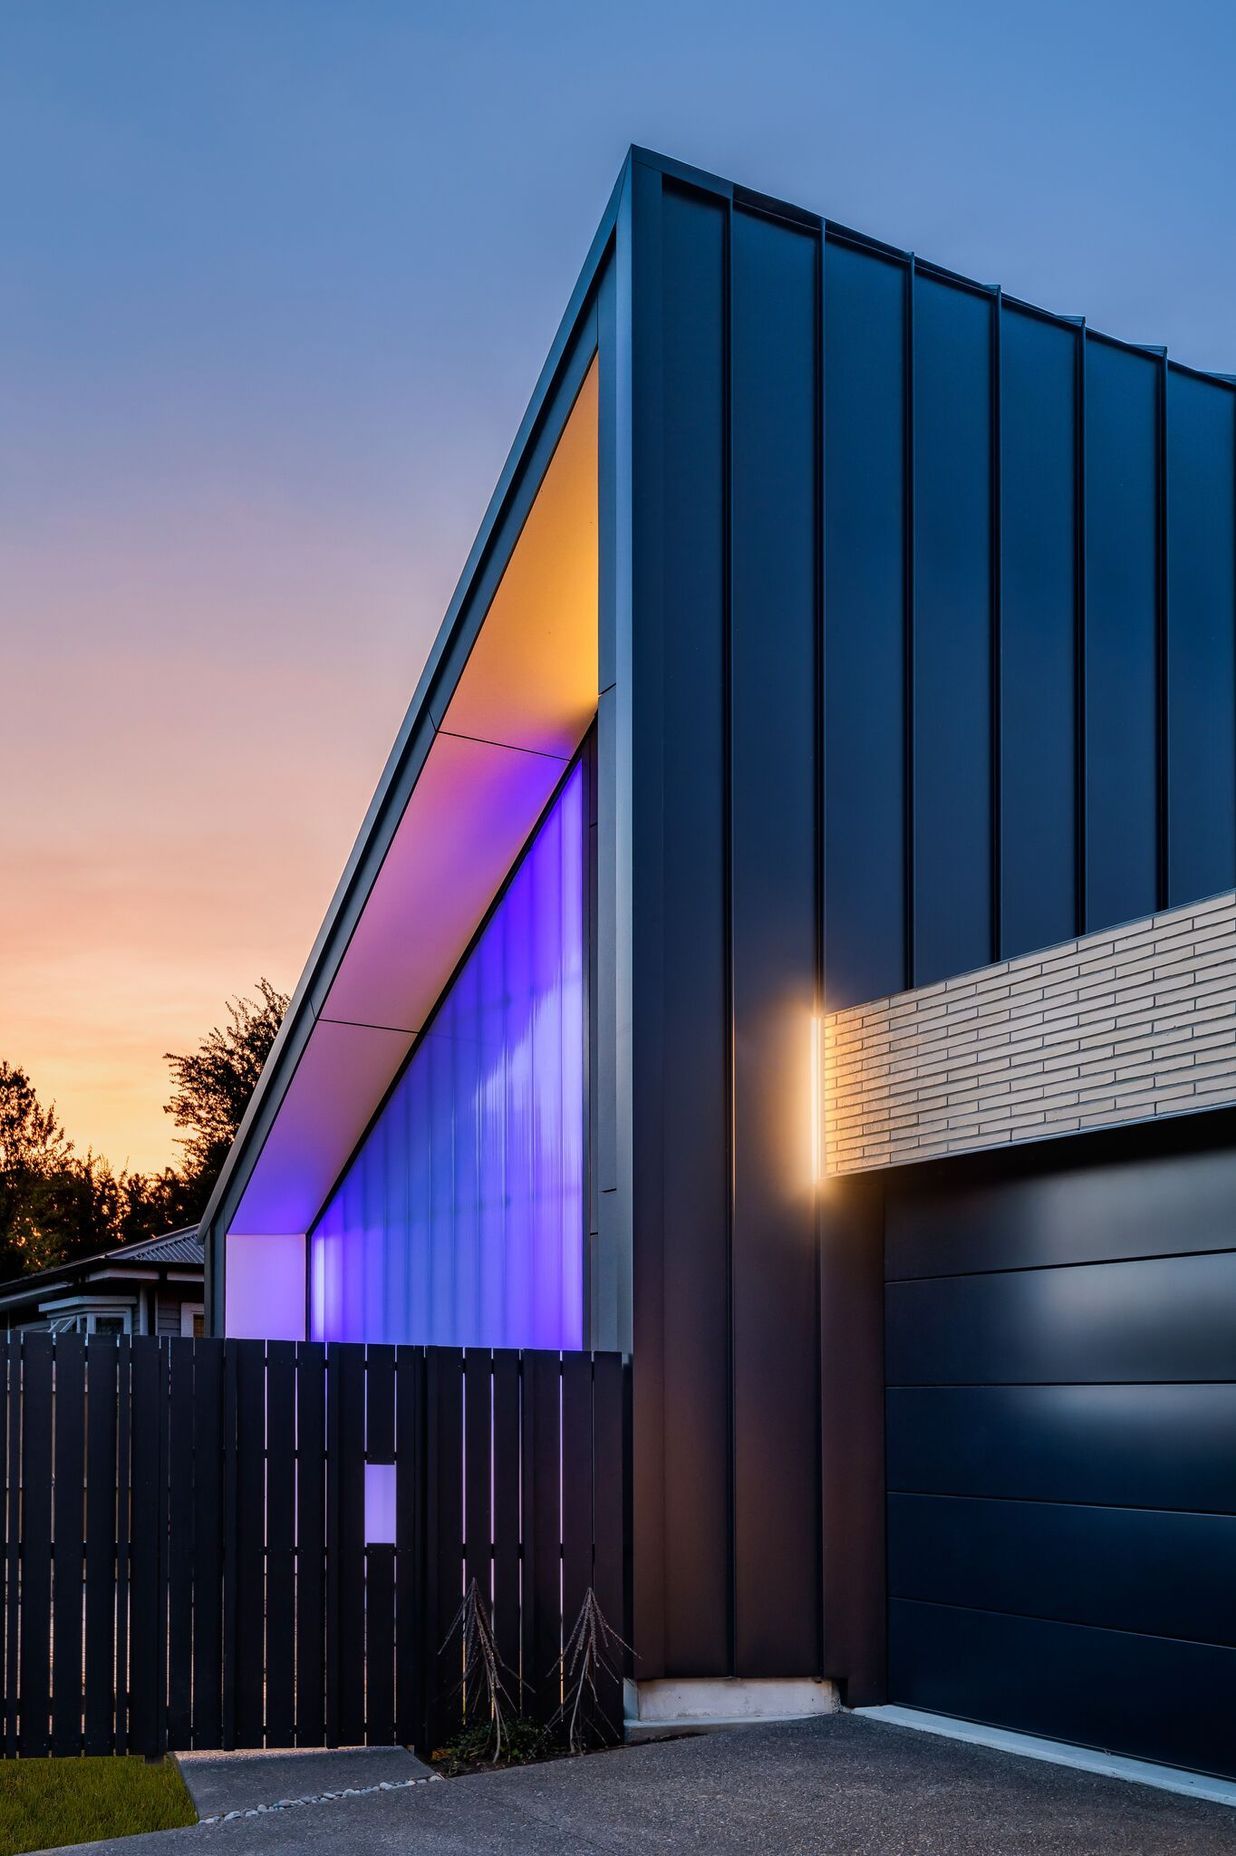 The street view shows the polycarbonate wall lit up at night and the flat metal wall of the half gable form. All photography by Anthony Turnham.